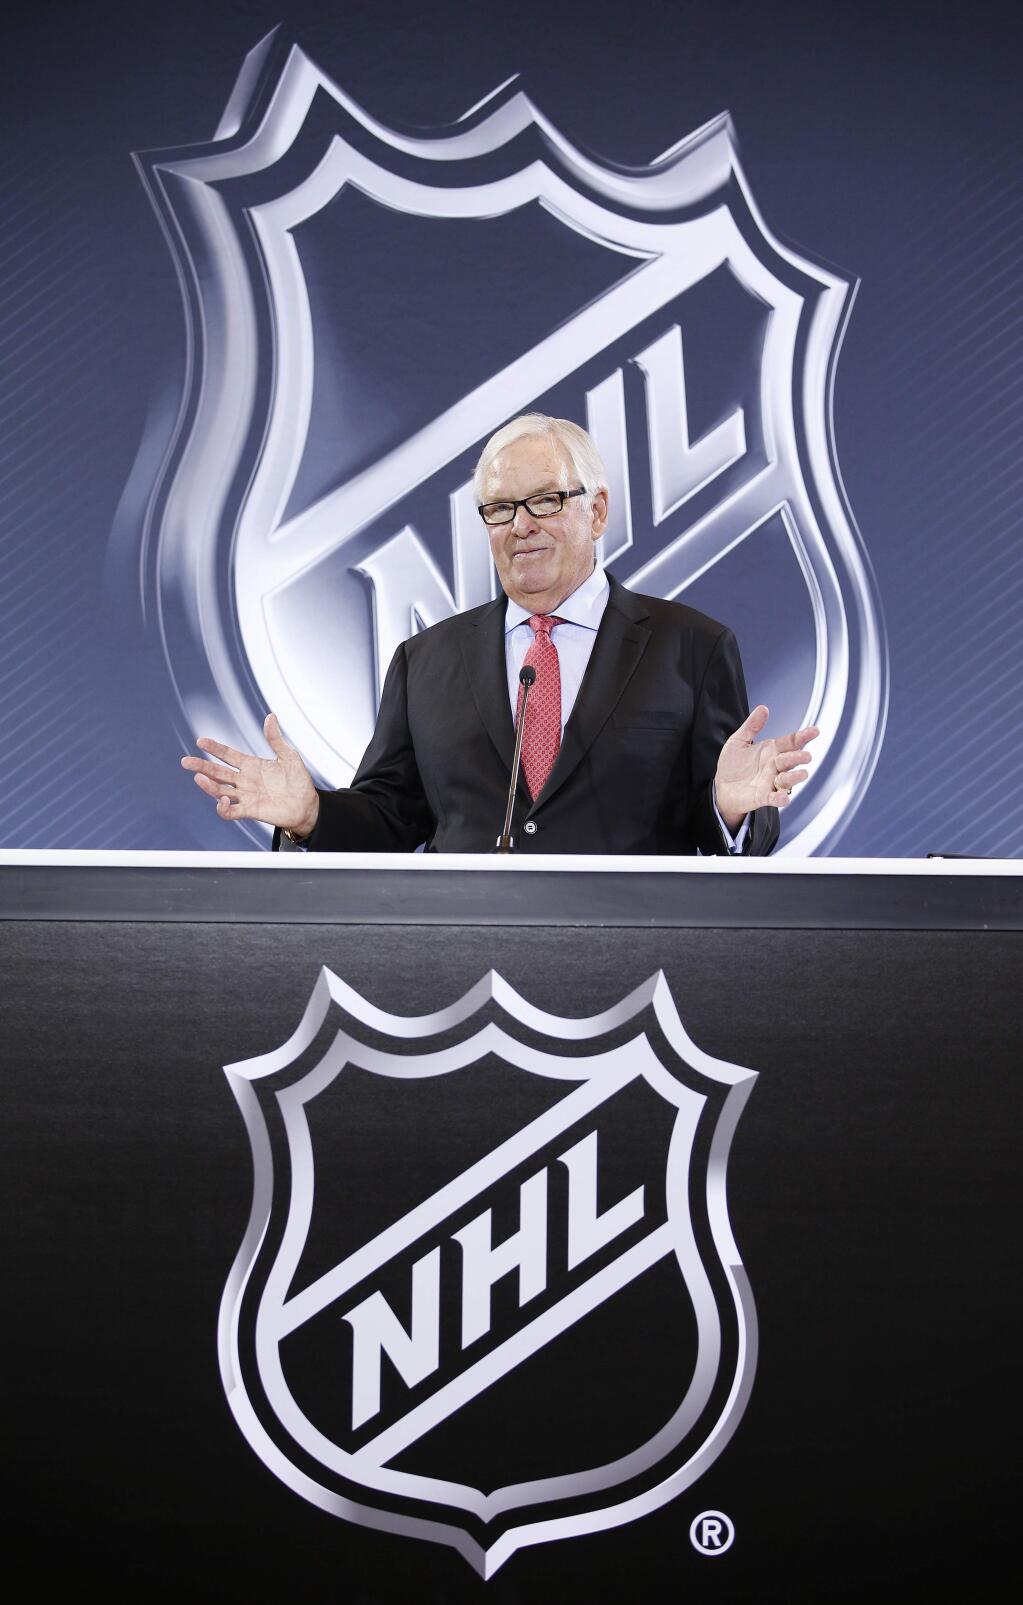 Bill Foley speaks during a news conference Wednesday, June 22, 2016, in Las Vegas. NHL Commissioner Gary Bettman announced an expansion franchise to Las Vegas after the league's board of governors met in Las Vegas. Foley is the majority owner of the team. (AP Photo/John Locher)